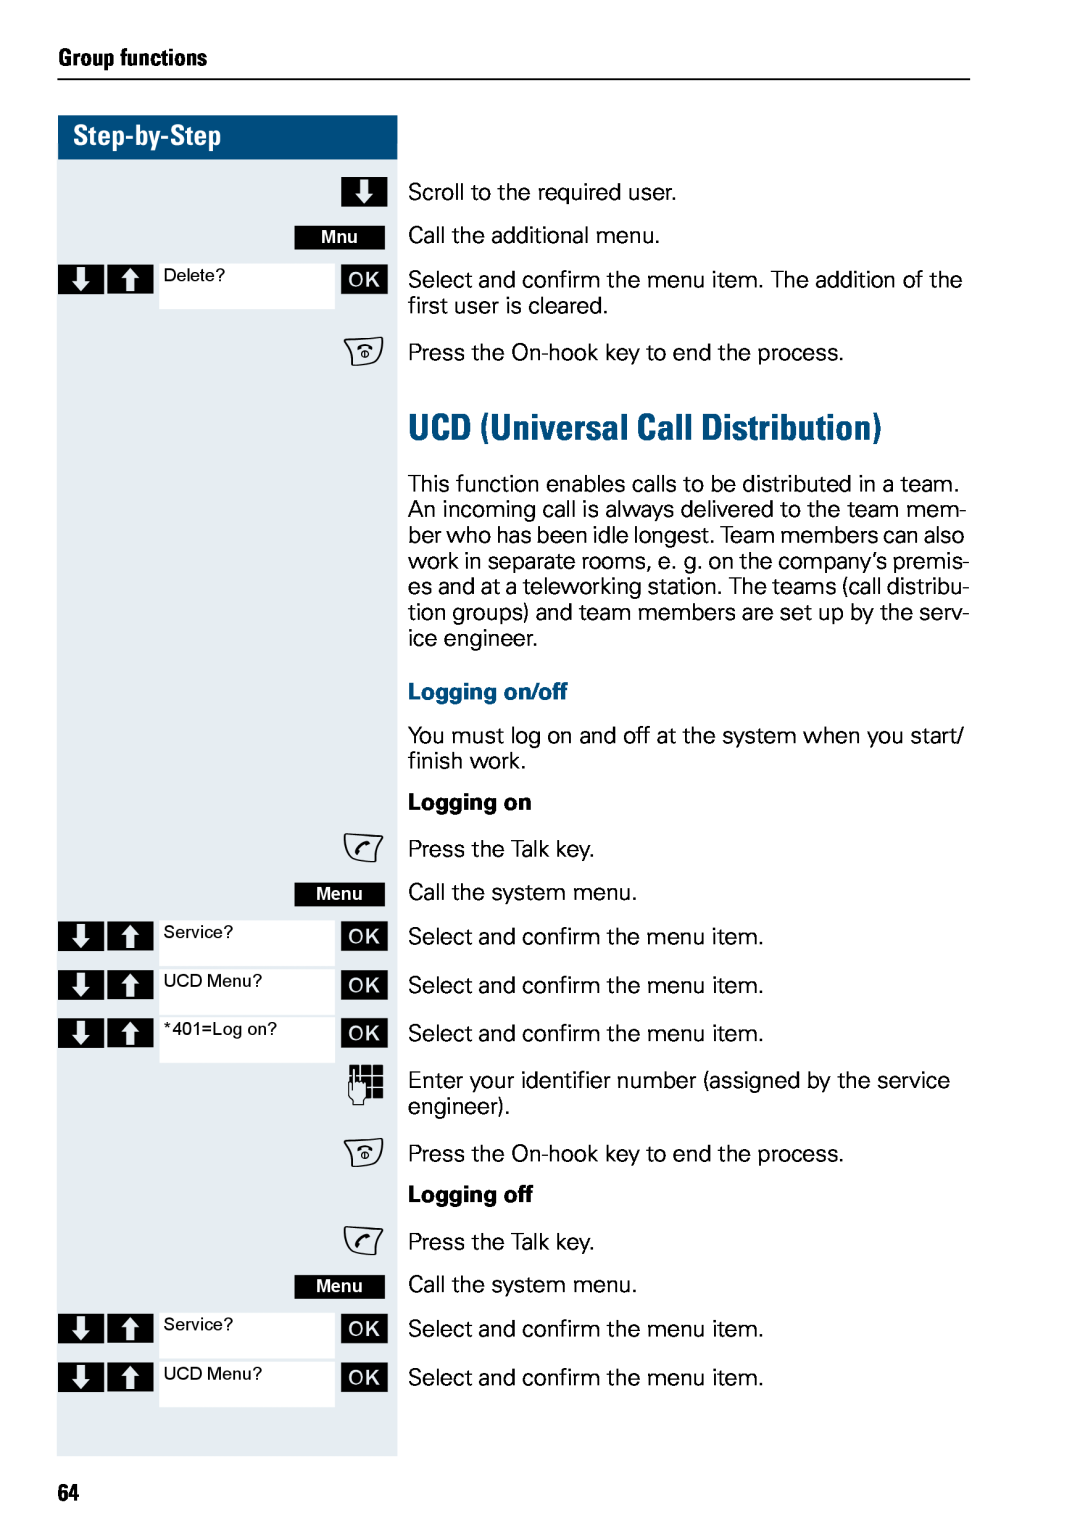 Siemens 500 manual UCD Universal Call Distribution, Step-by-Step, Group functions, Logging on/off, Logging off 